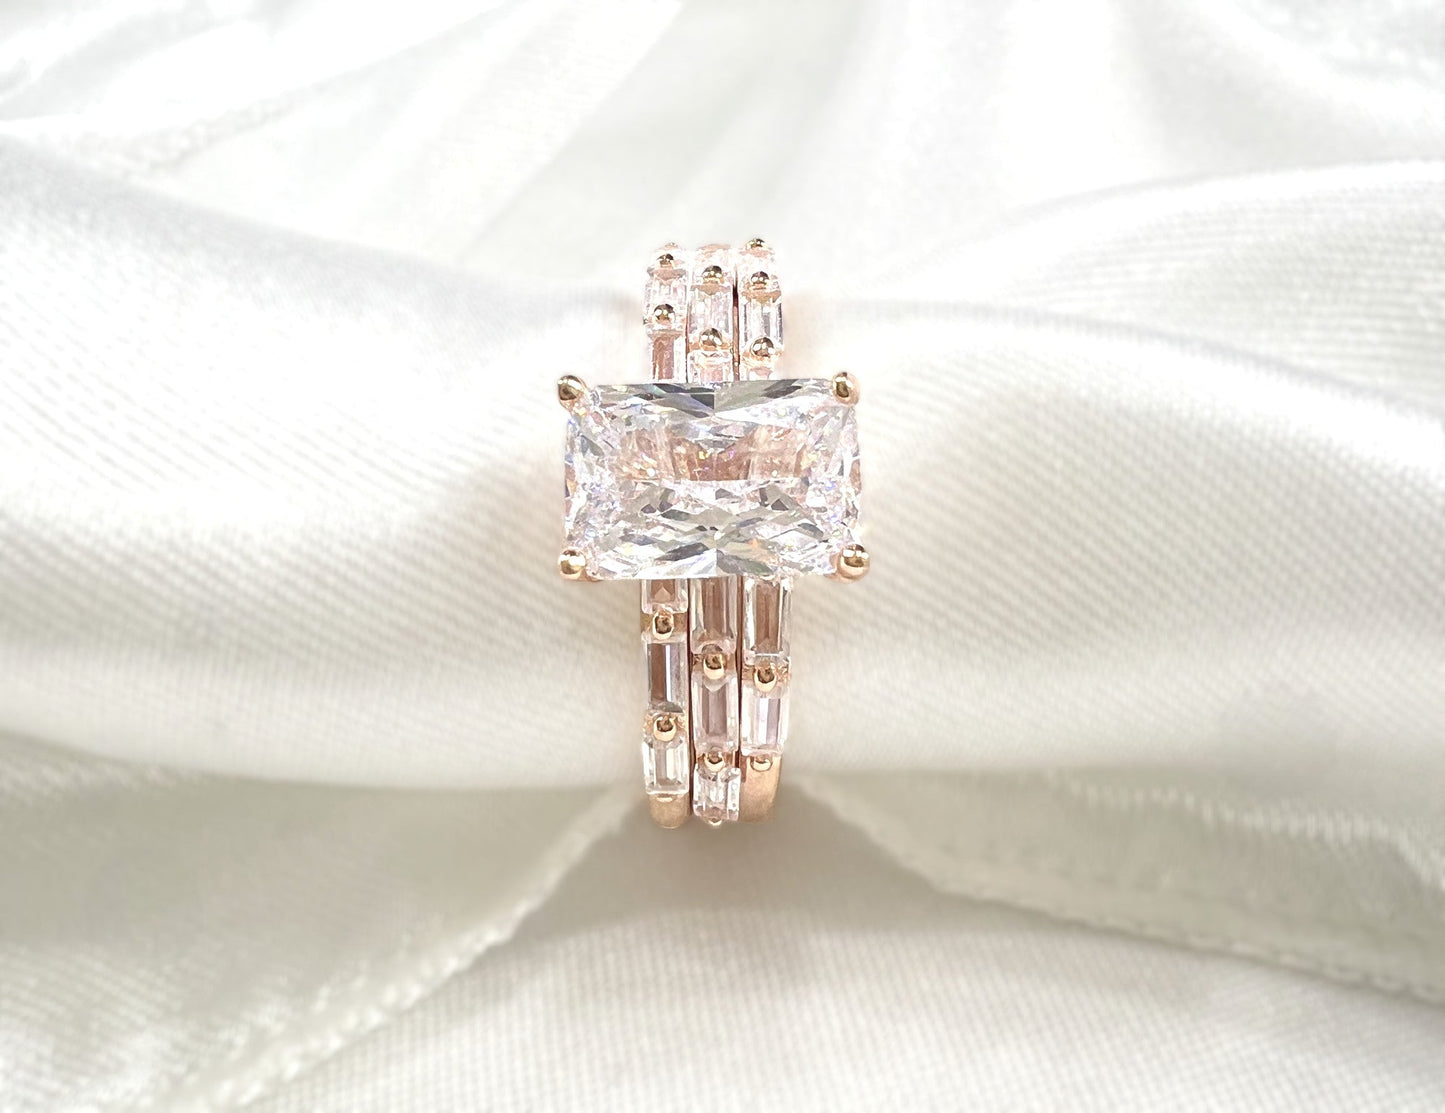 *PRE-ORDER* 925 Sterling Silver Emerald Cut Diamond 3 Piece Stackable Ring Set on Rose Gold